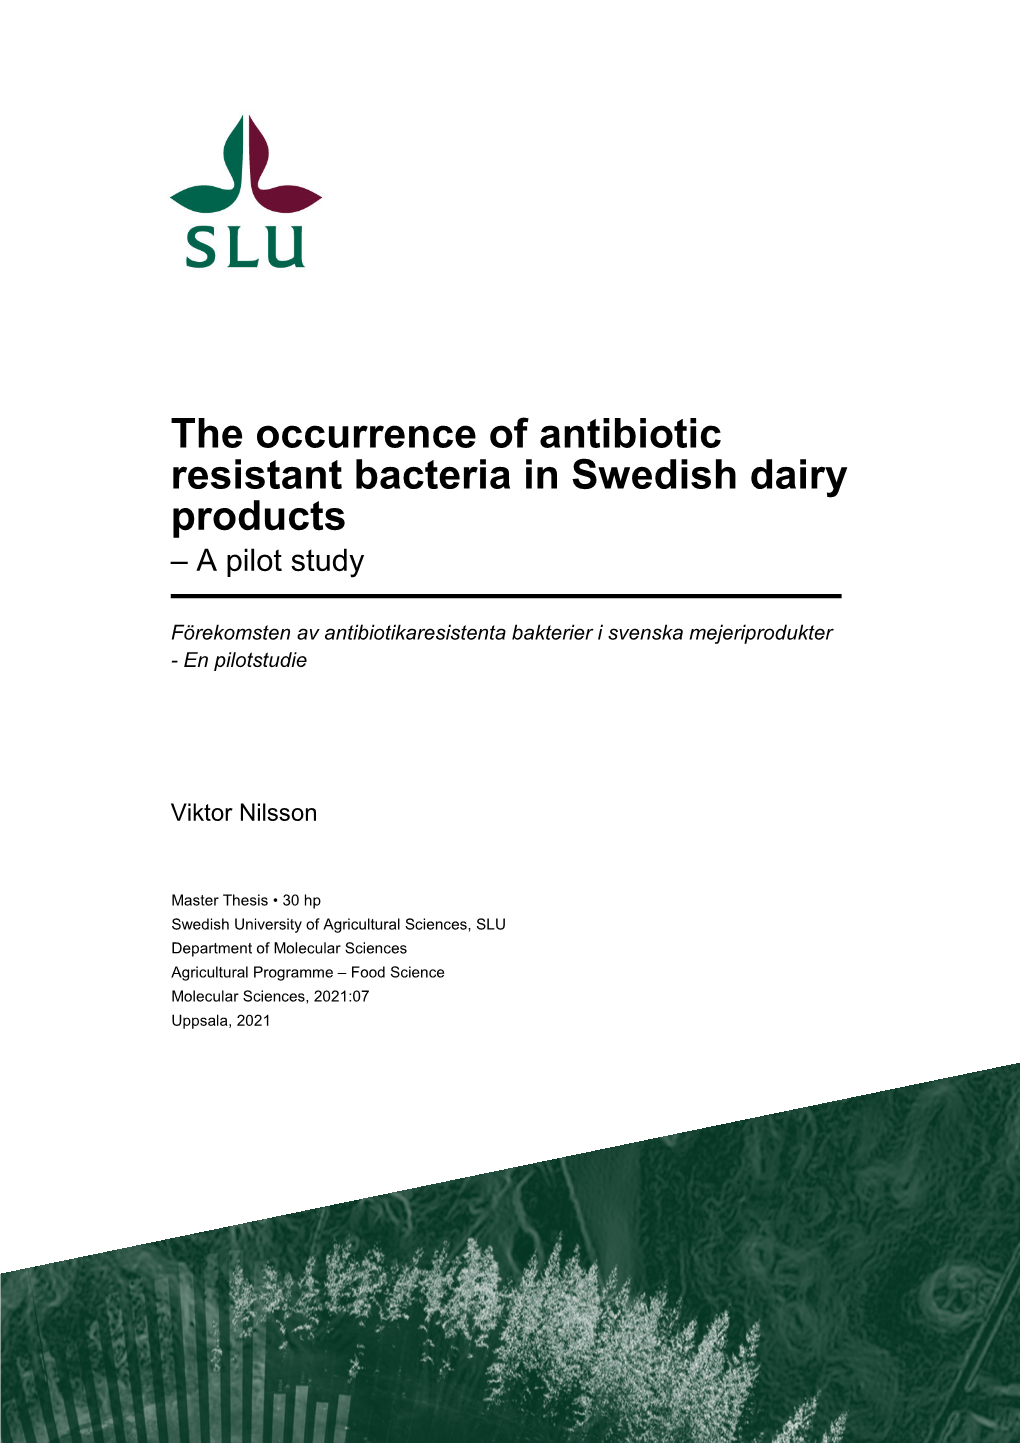 The Occurrence of Antibiotic Resistant Bacteria in Swedish Dairy Products – a Pilot Study